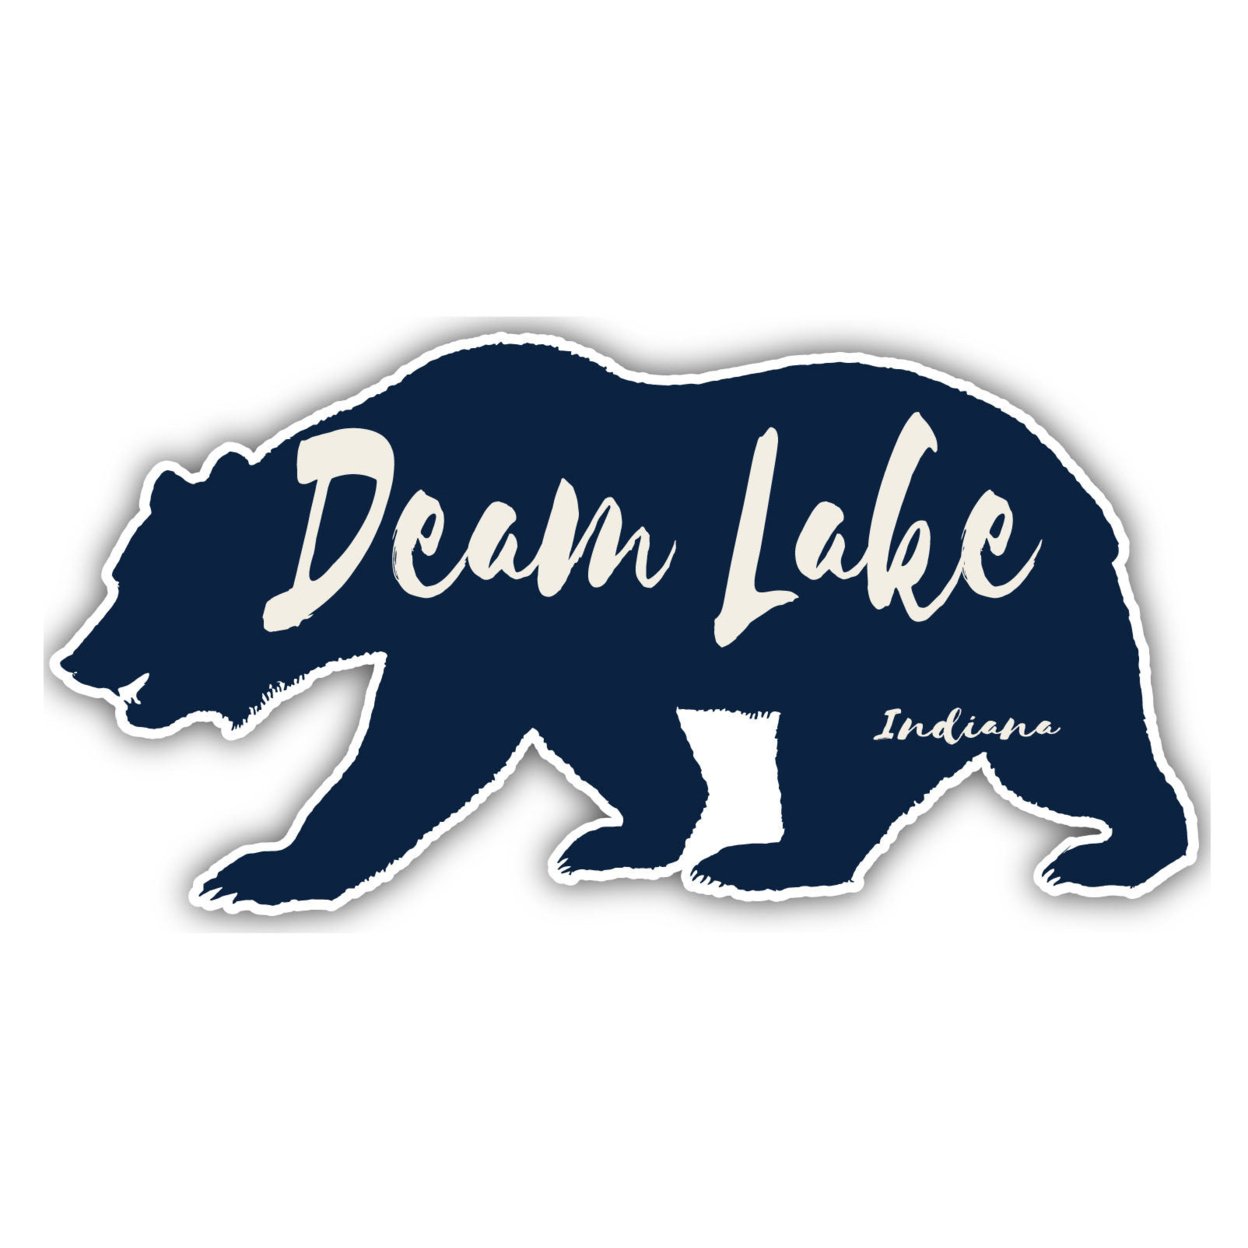 Deam Lake Indiana Souvenir Decorative Stickers (Choose Theme And Size) - 4-Pack, 10-Inch, Great Outdoors